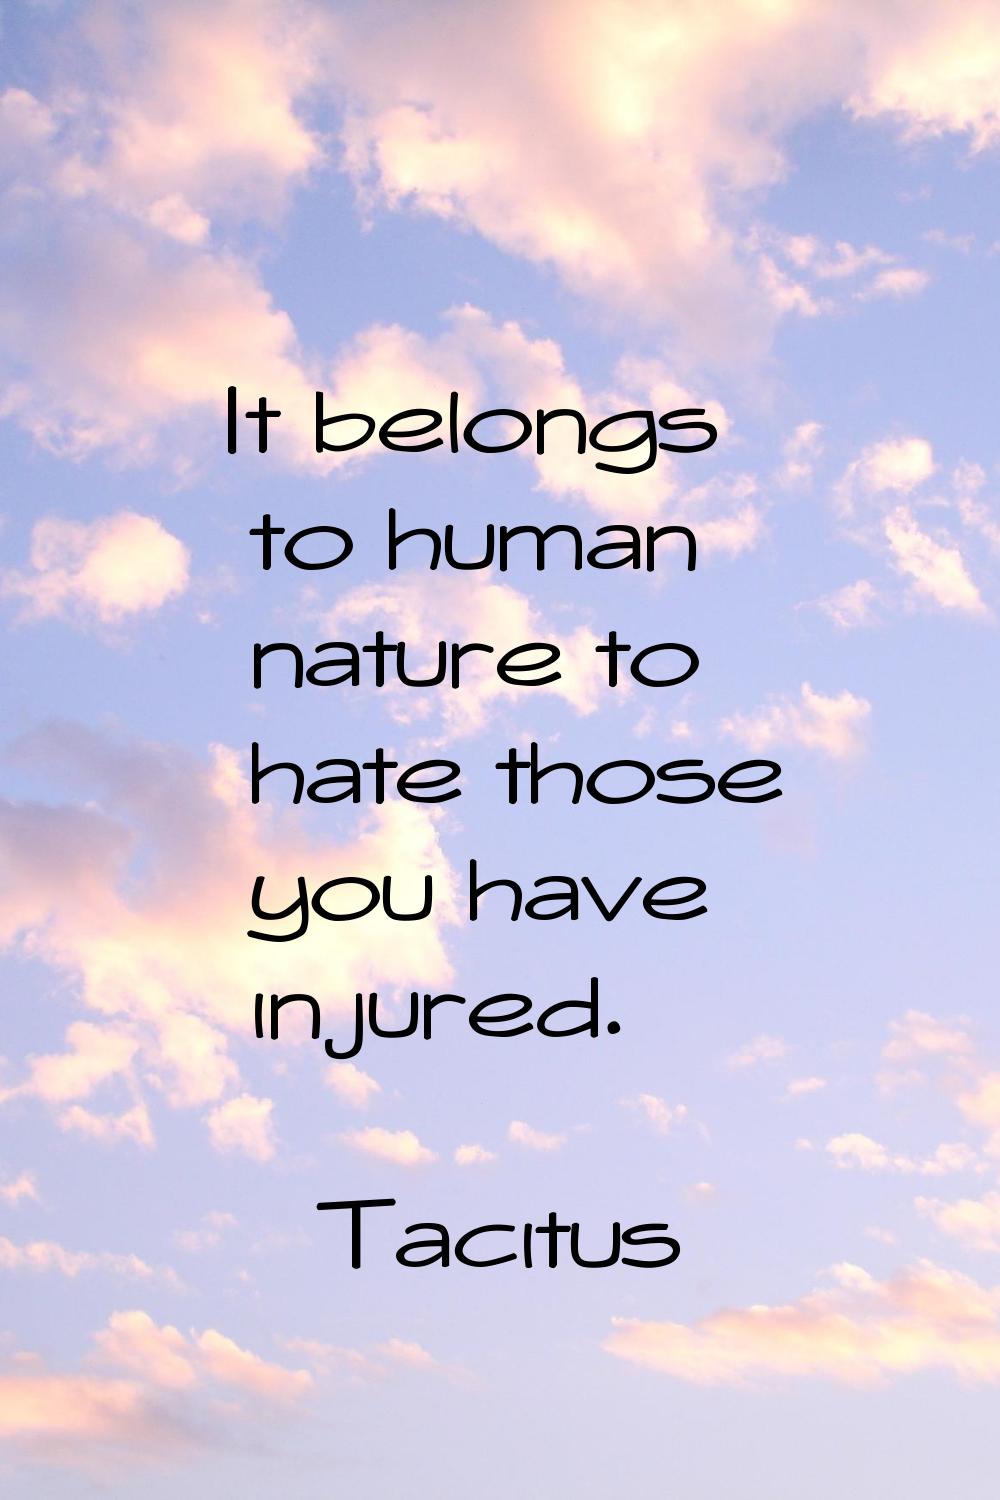 It belongs to human nature to hate those you have injured.